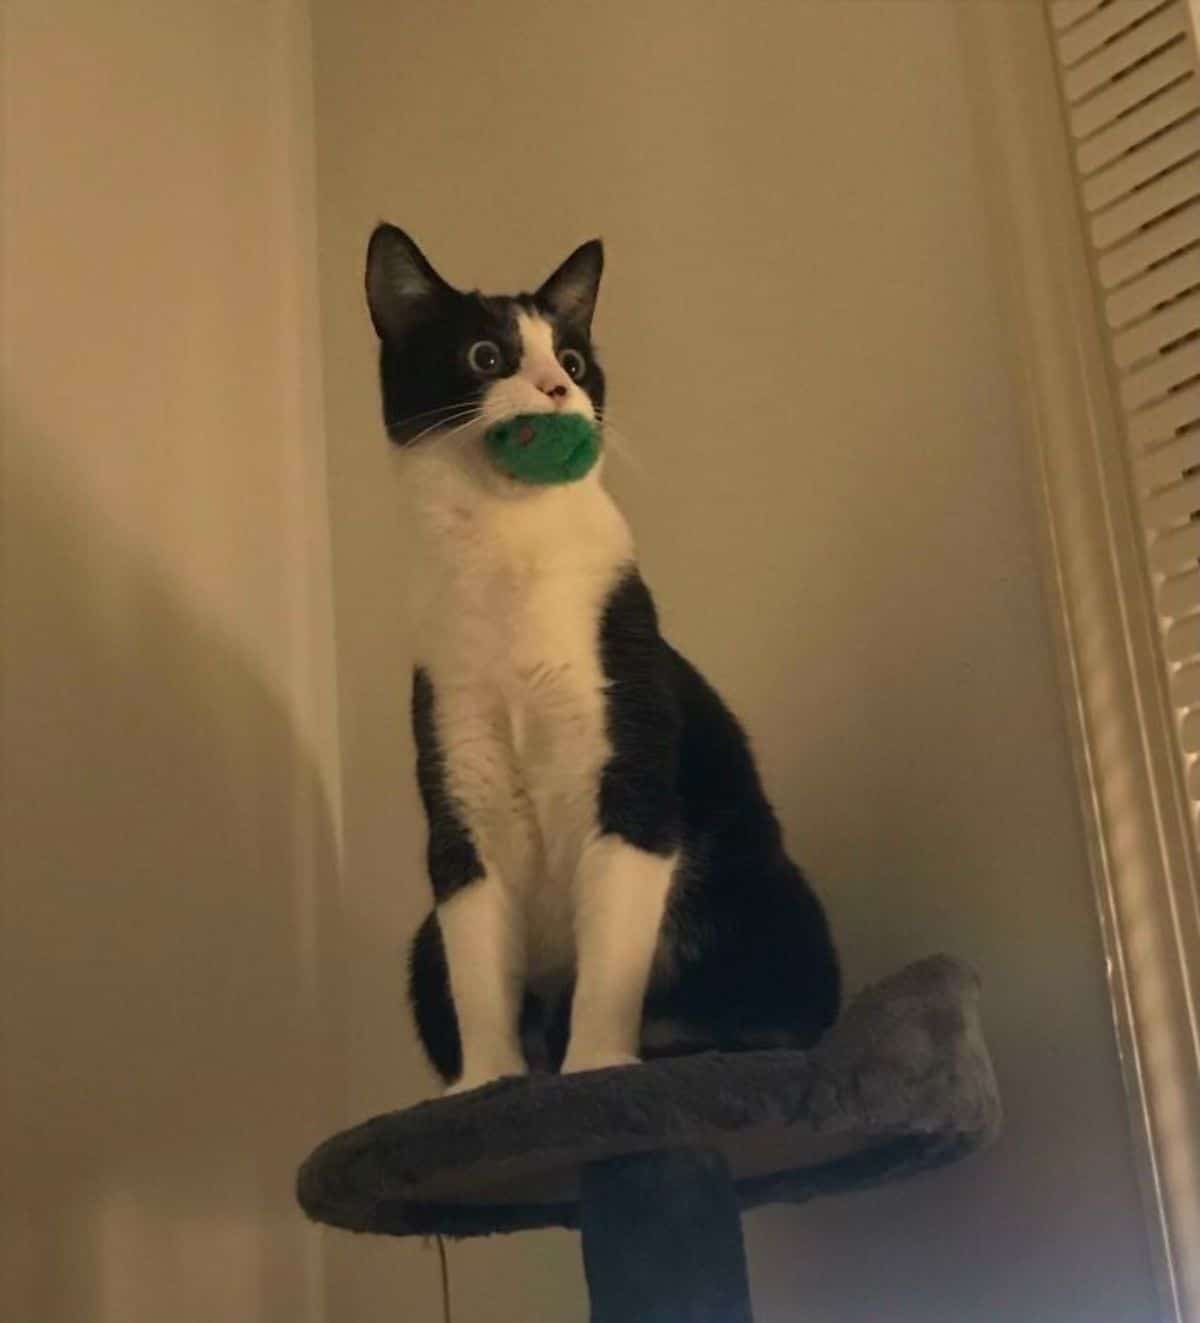 black and white cat sitting on a cat tree and holding a green ball in its mouth